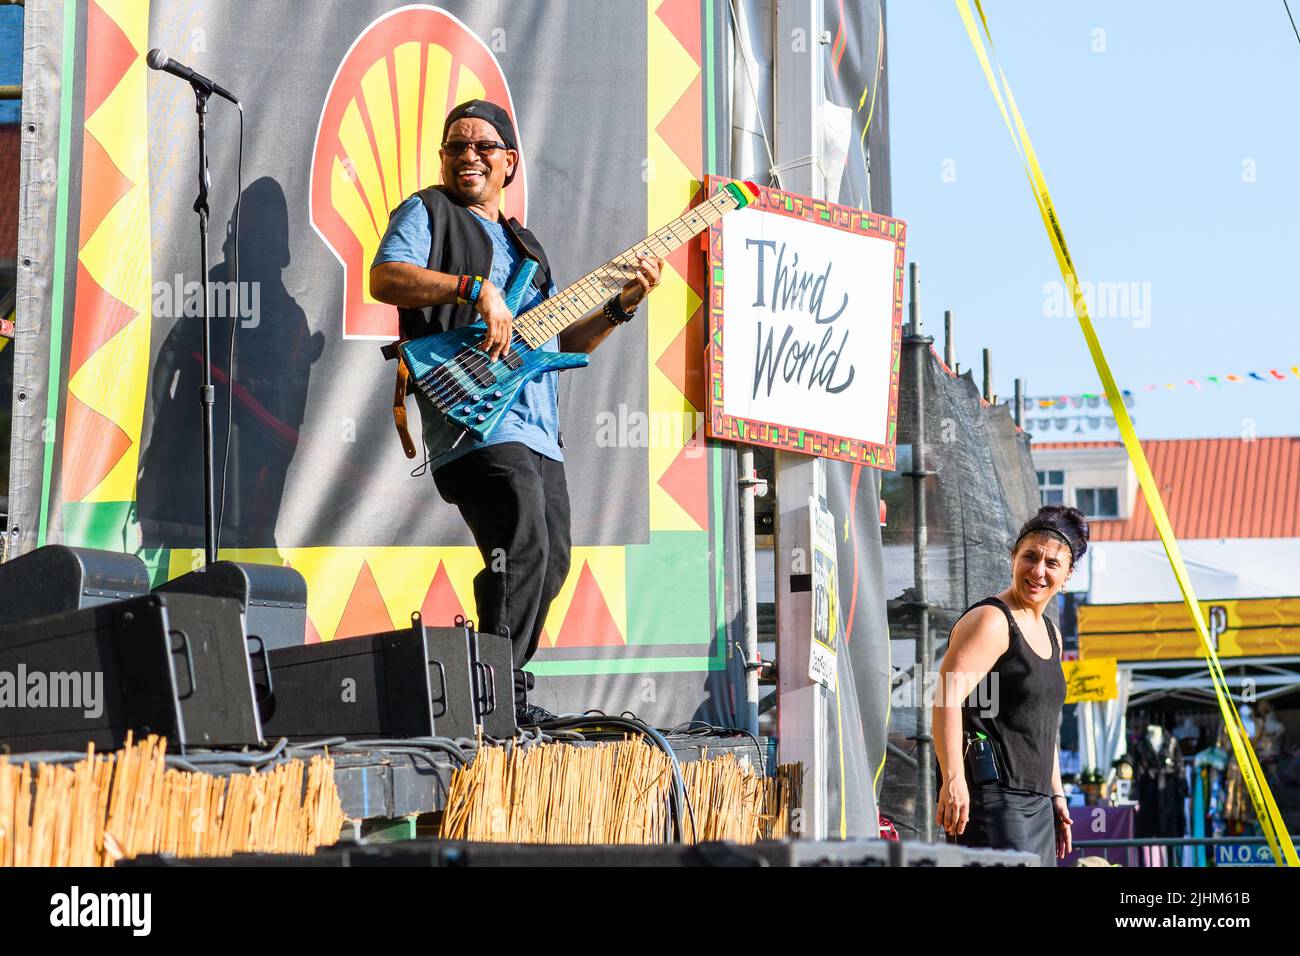 NEW ORLEANS, LA, USA - April 29, 2022: Richard Daley plays bass in front of Third World sign with woman standing by to give interpretive sign language Stock Photo